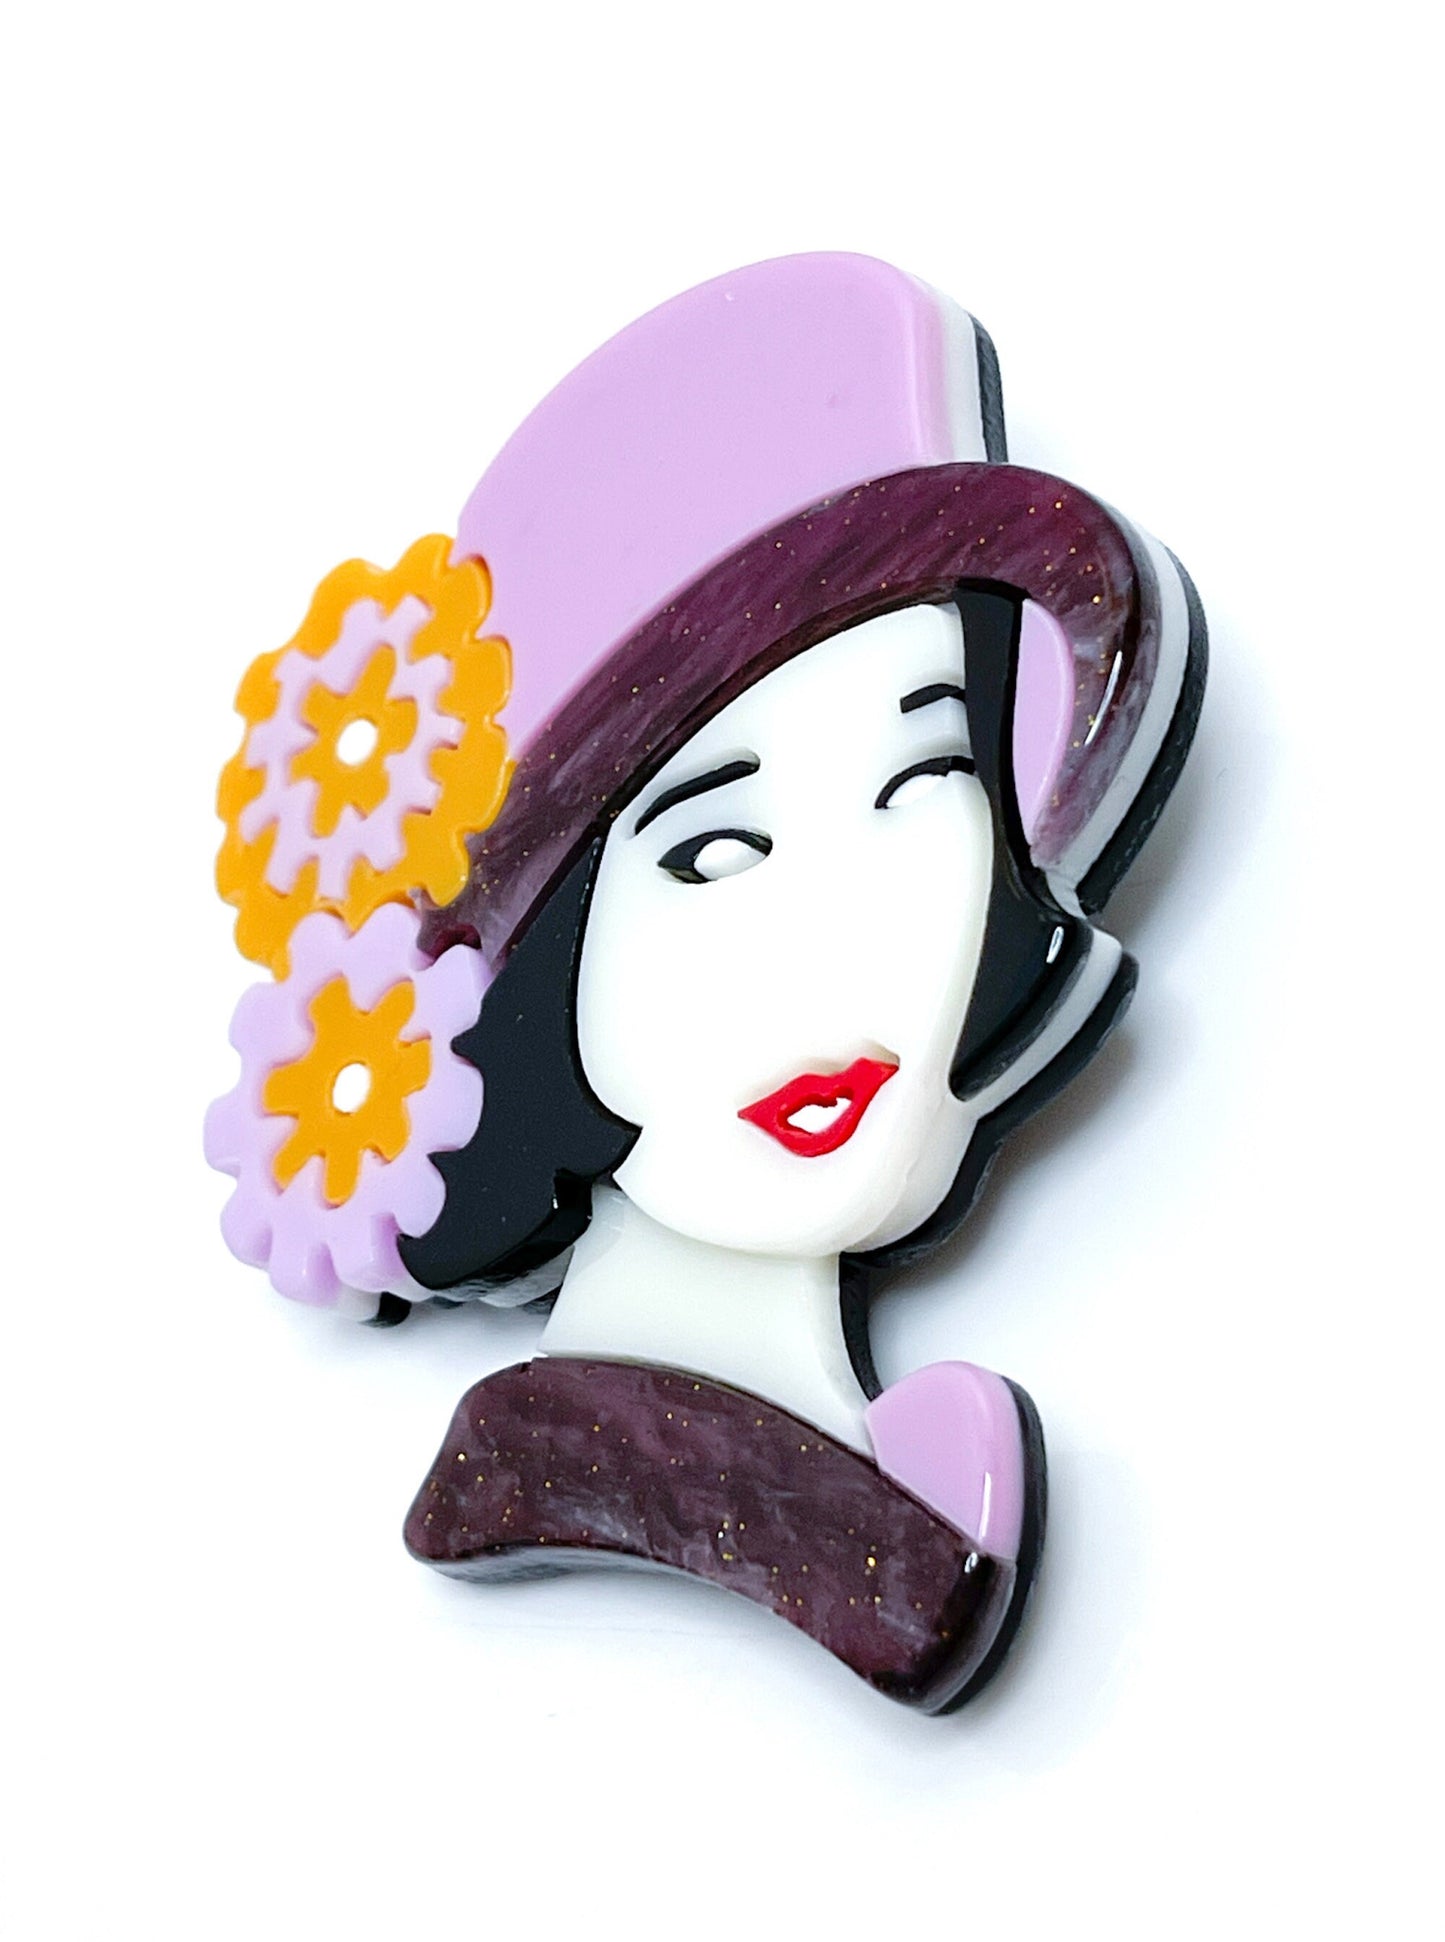 1920's Lady Brooch, Stylish Lady in Hat with Flowers Pin, Fashion Pin for Jacket Scarf, Art Deco Lady Pin, Brooches For Women